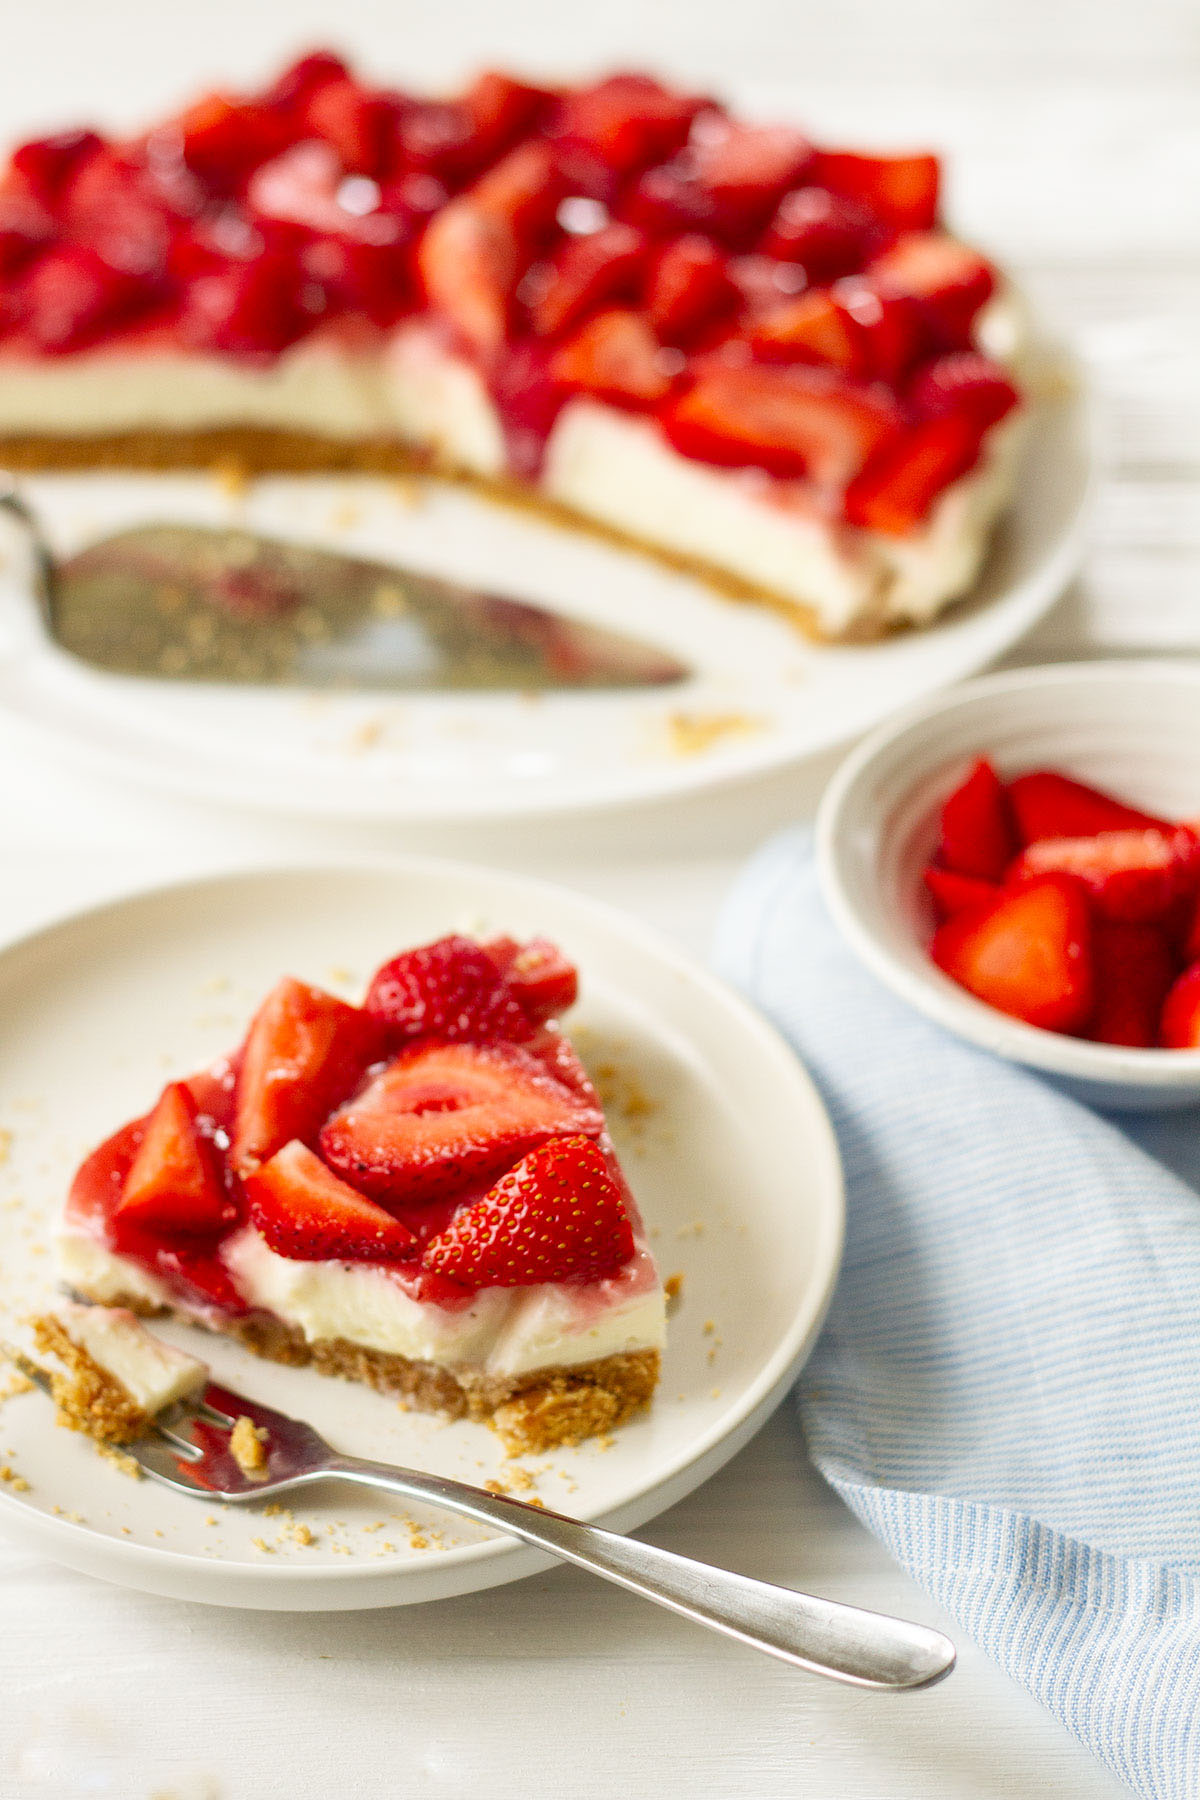 No Bake Strawberry Cheesecake served on a white plate.